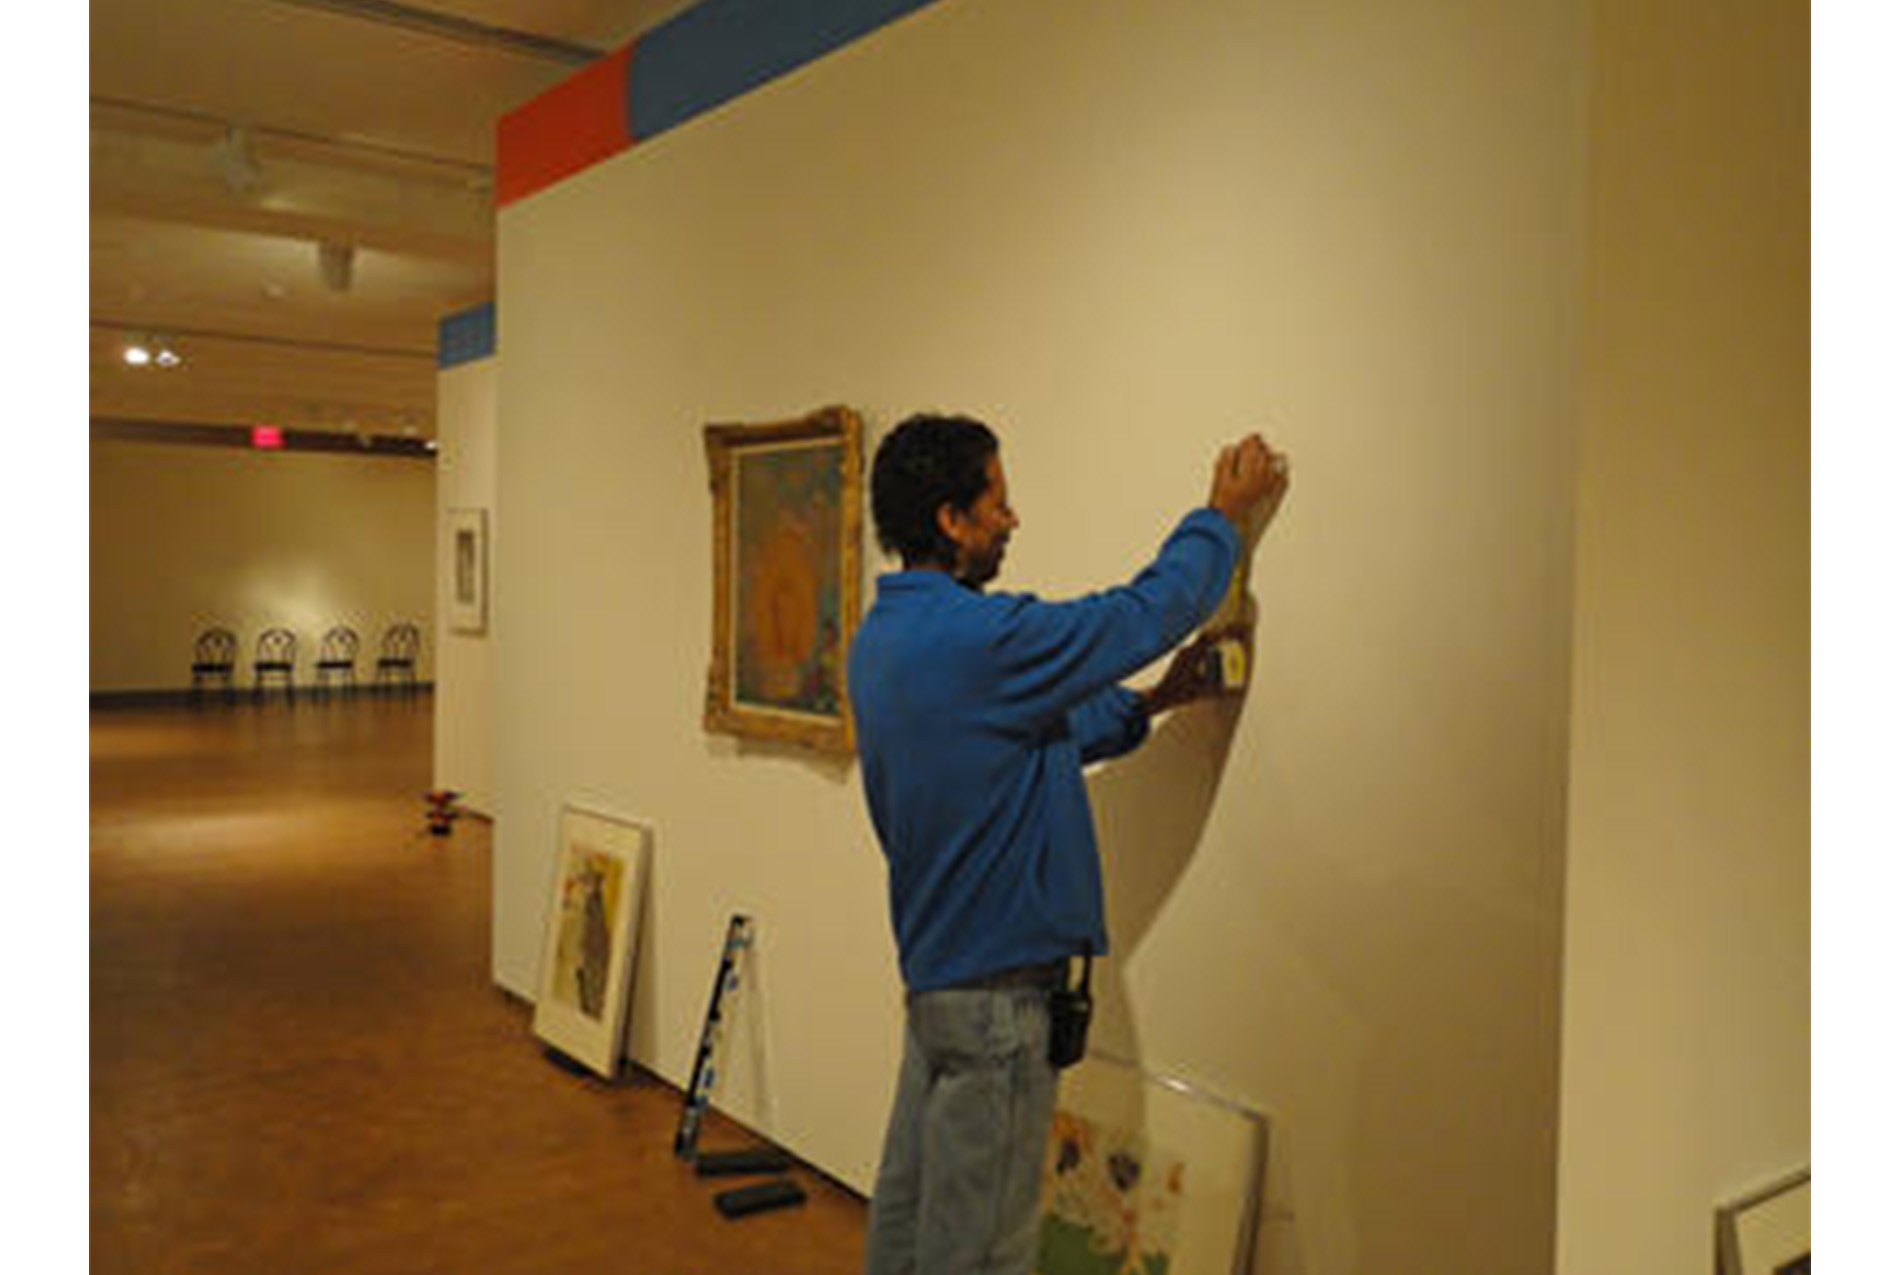 man stands in an art gallery, holding a measuring tape to the wall